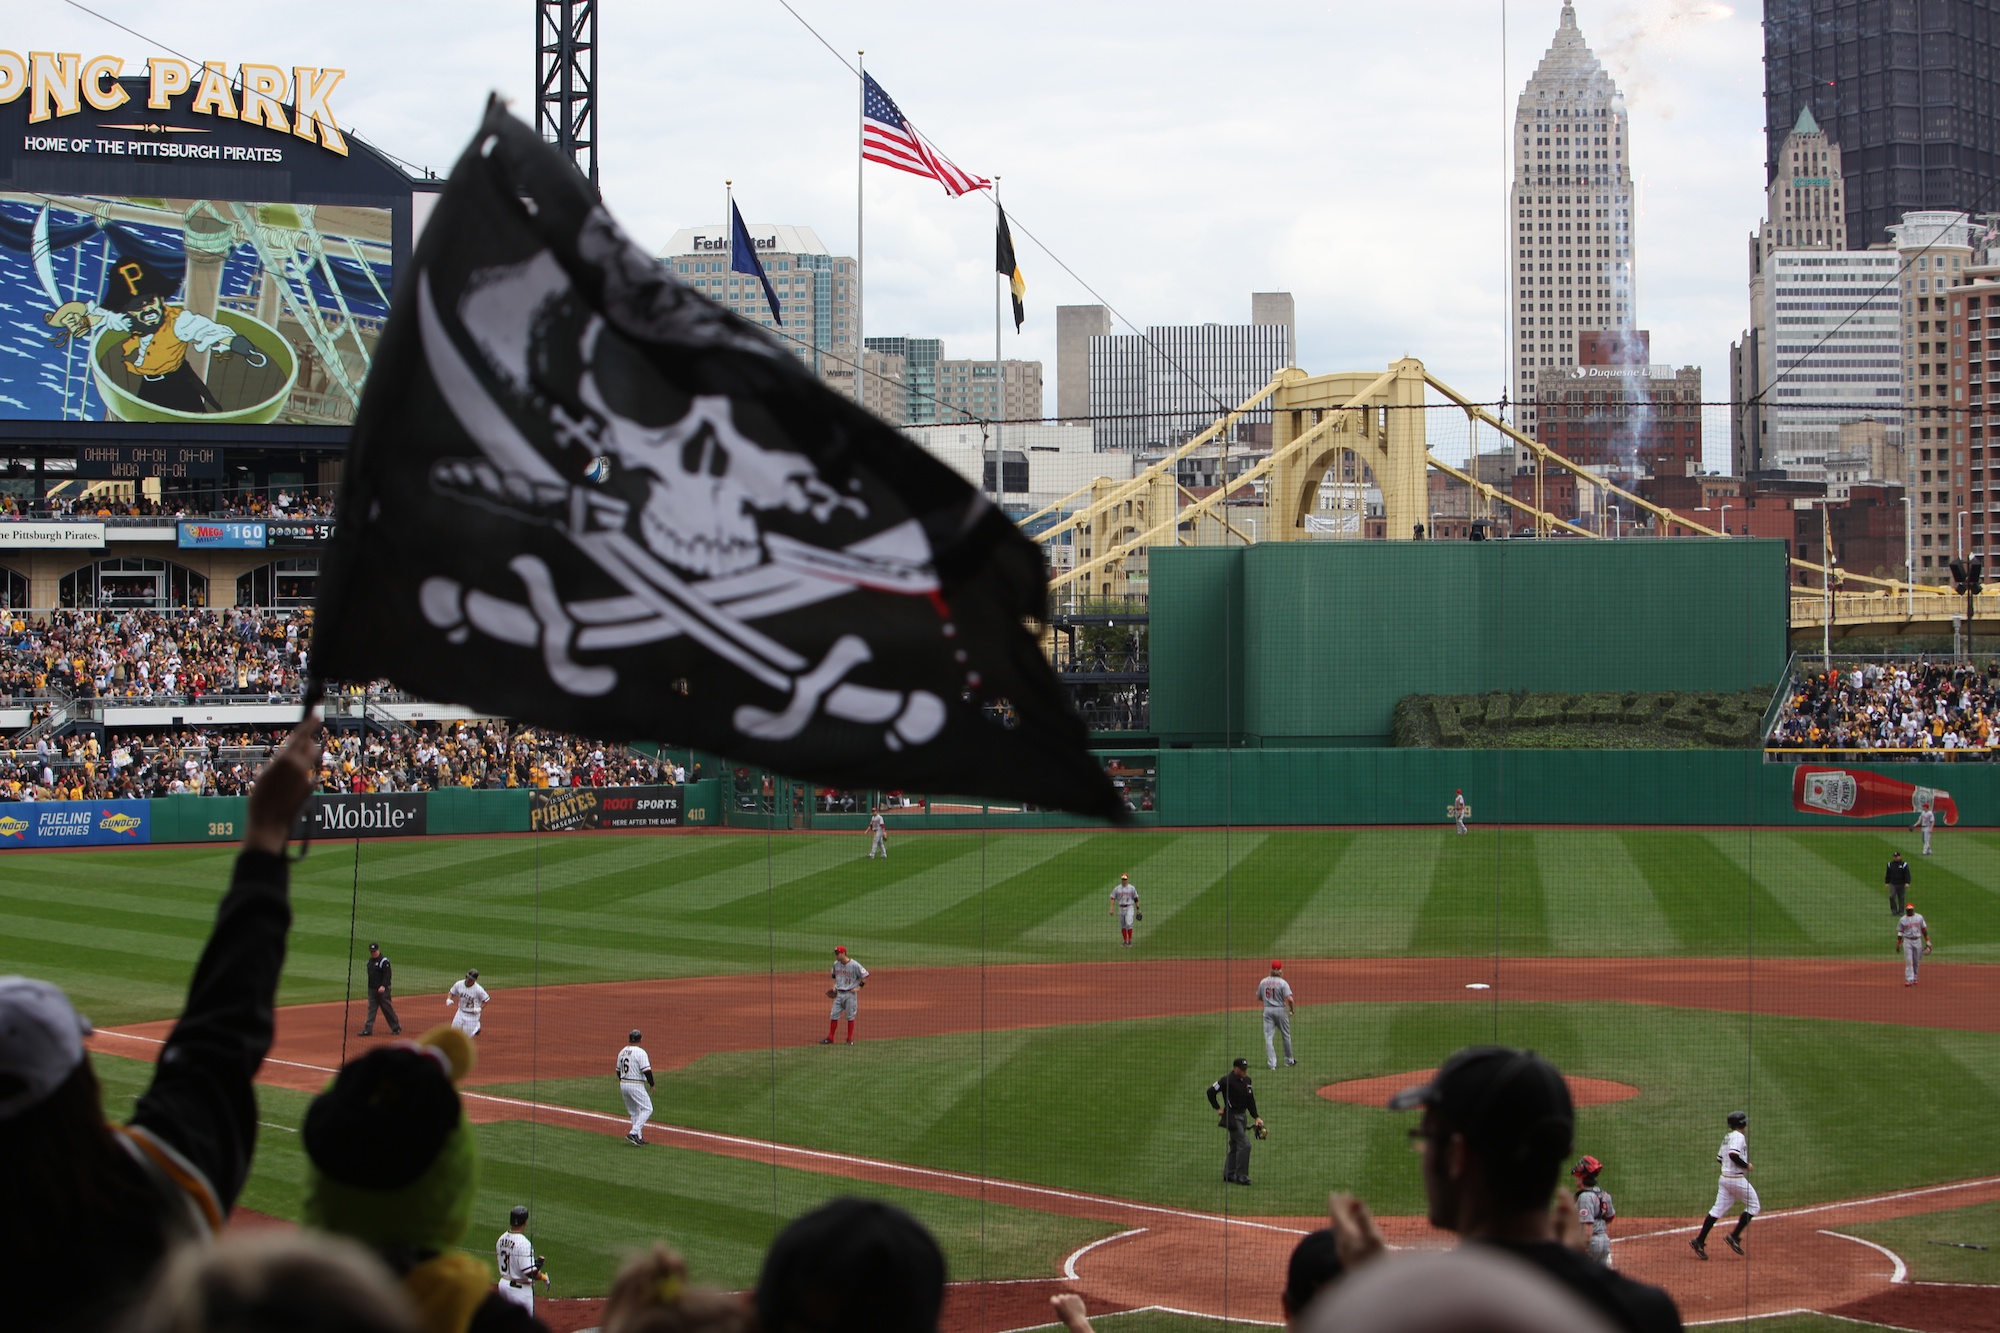 pittsburgh pirates raise the jolly roger flag